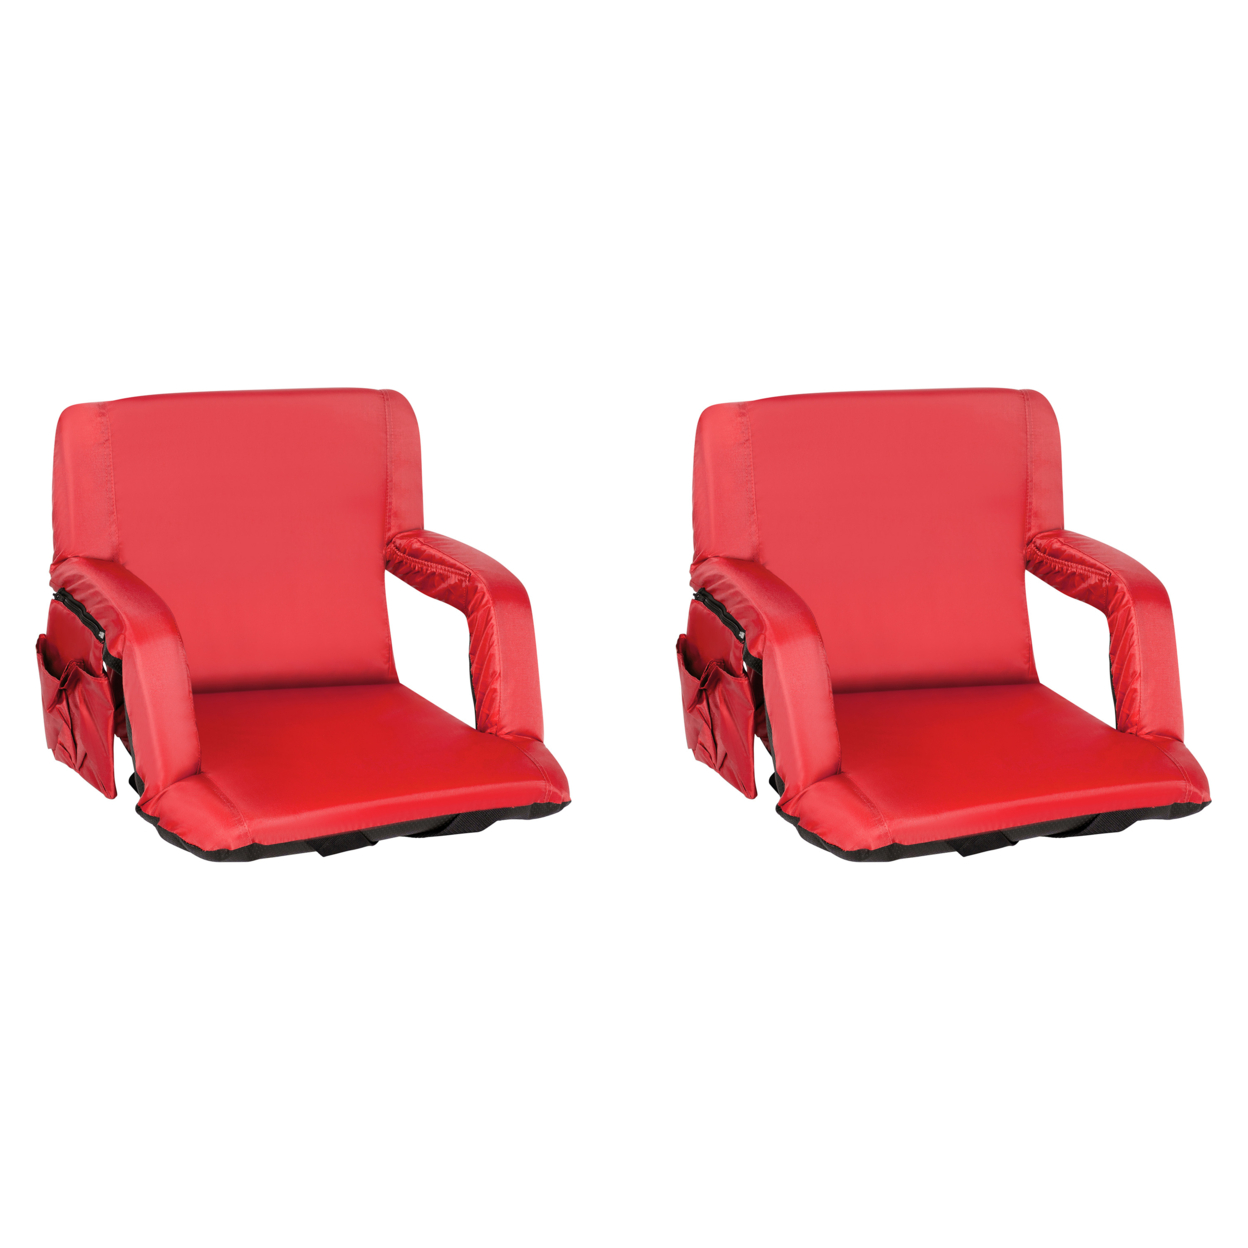 Set Of 2 Red Portable Lightweight Reclining Stadium Chairs With Armrests, Padded Back & Seat - Storage Pockets & Backpack Straps